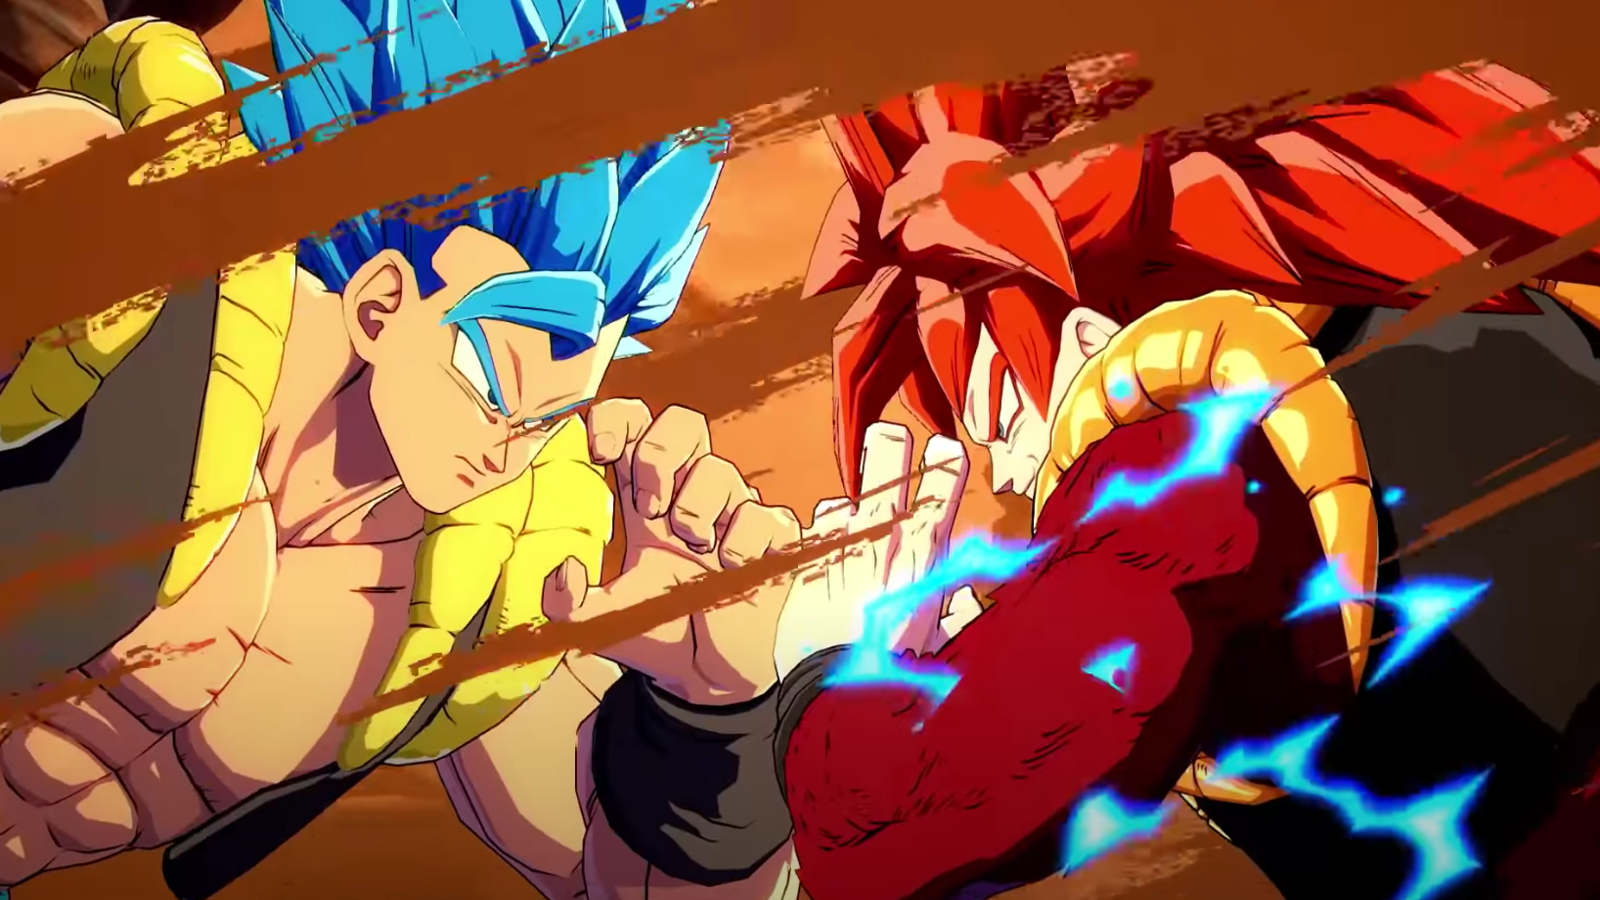 Dragonball FighterZ Gets Its Latest Fighter with SSJ4 Gogeta